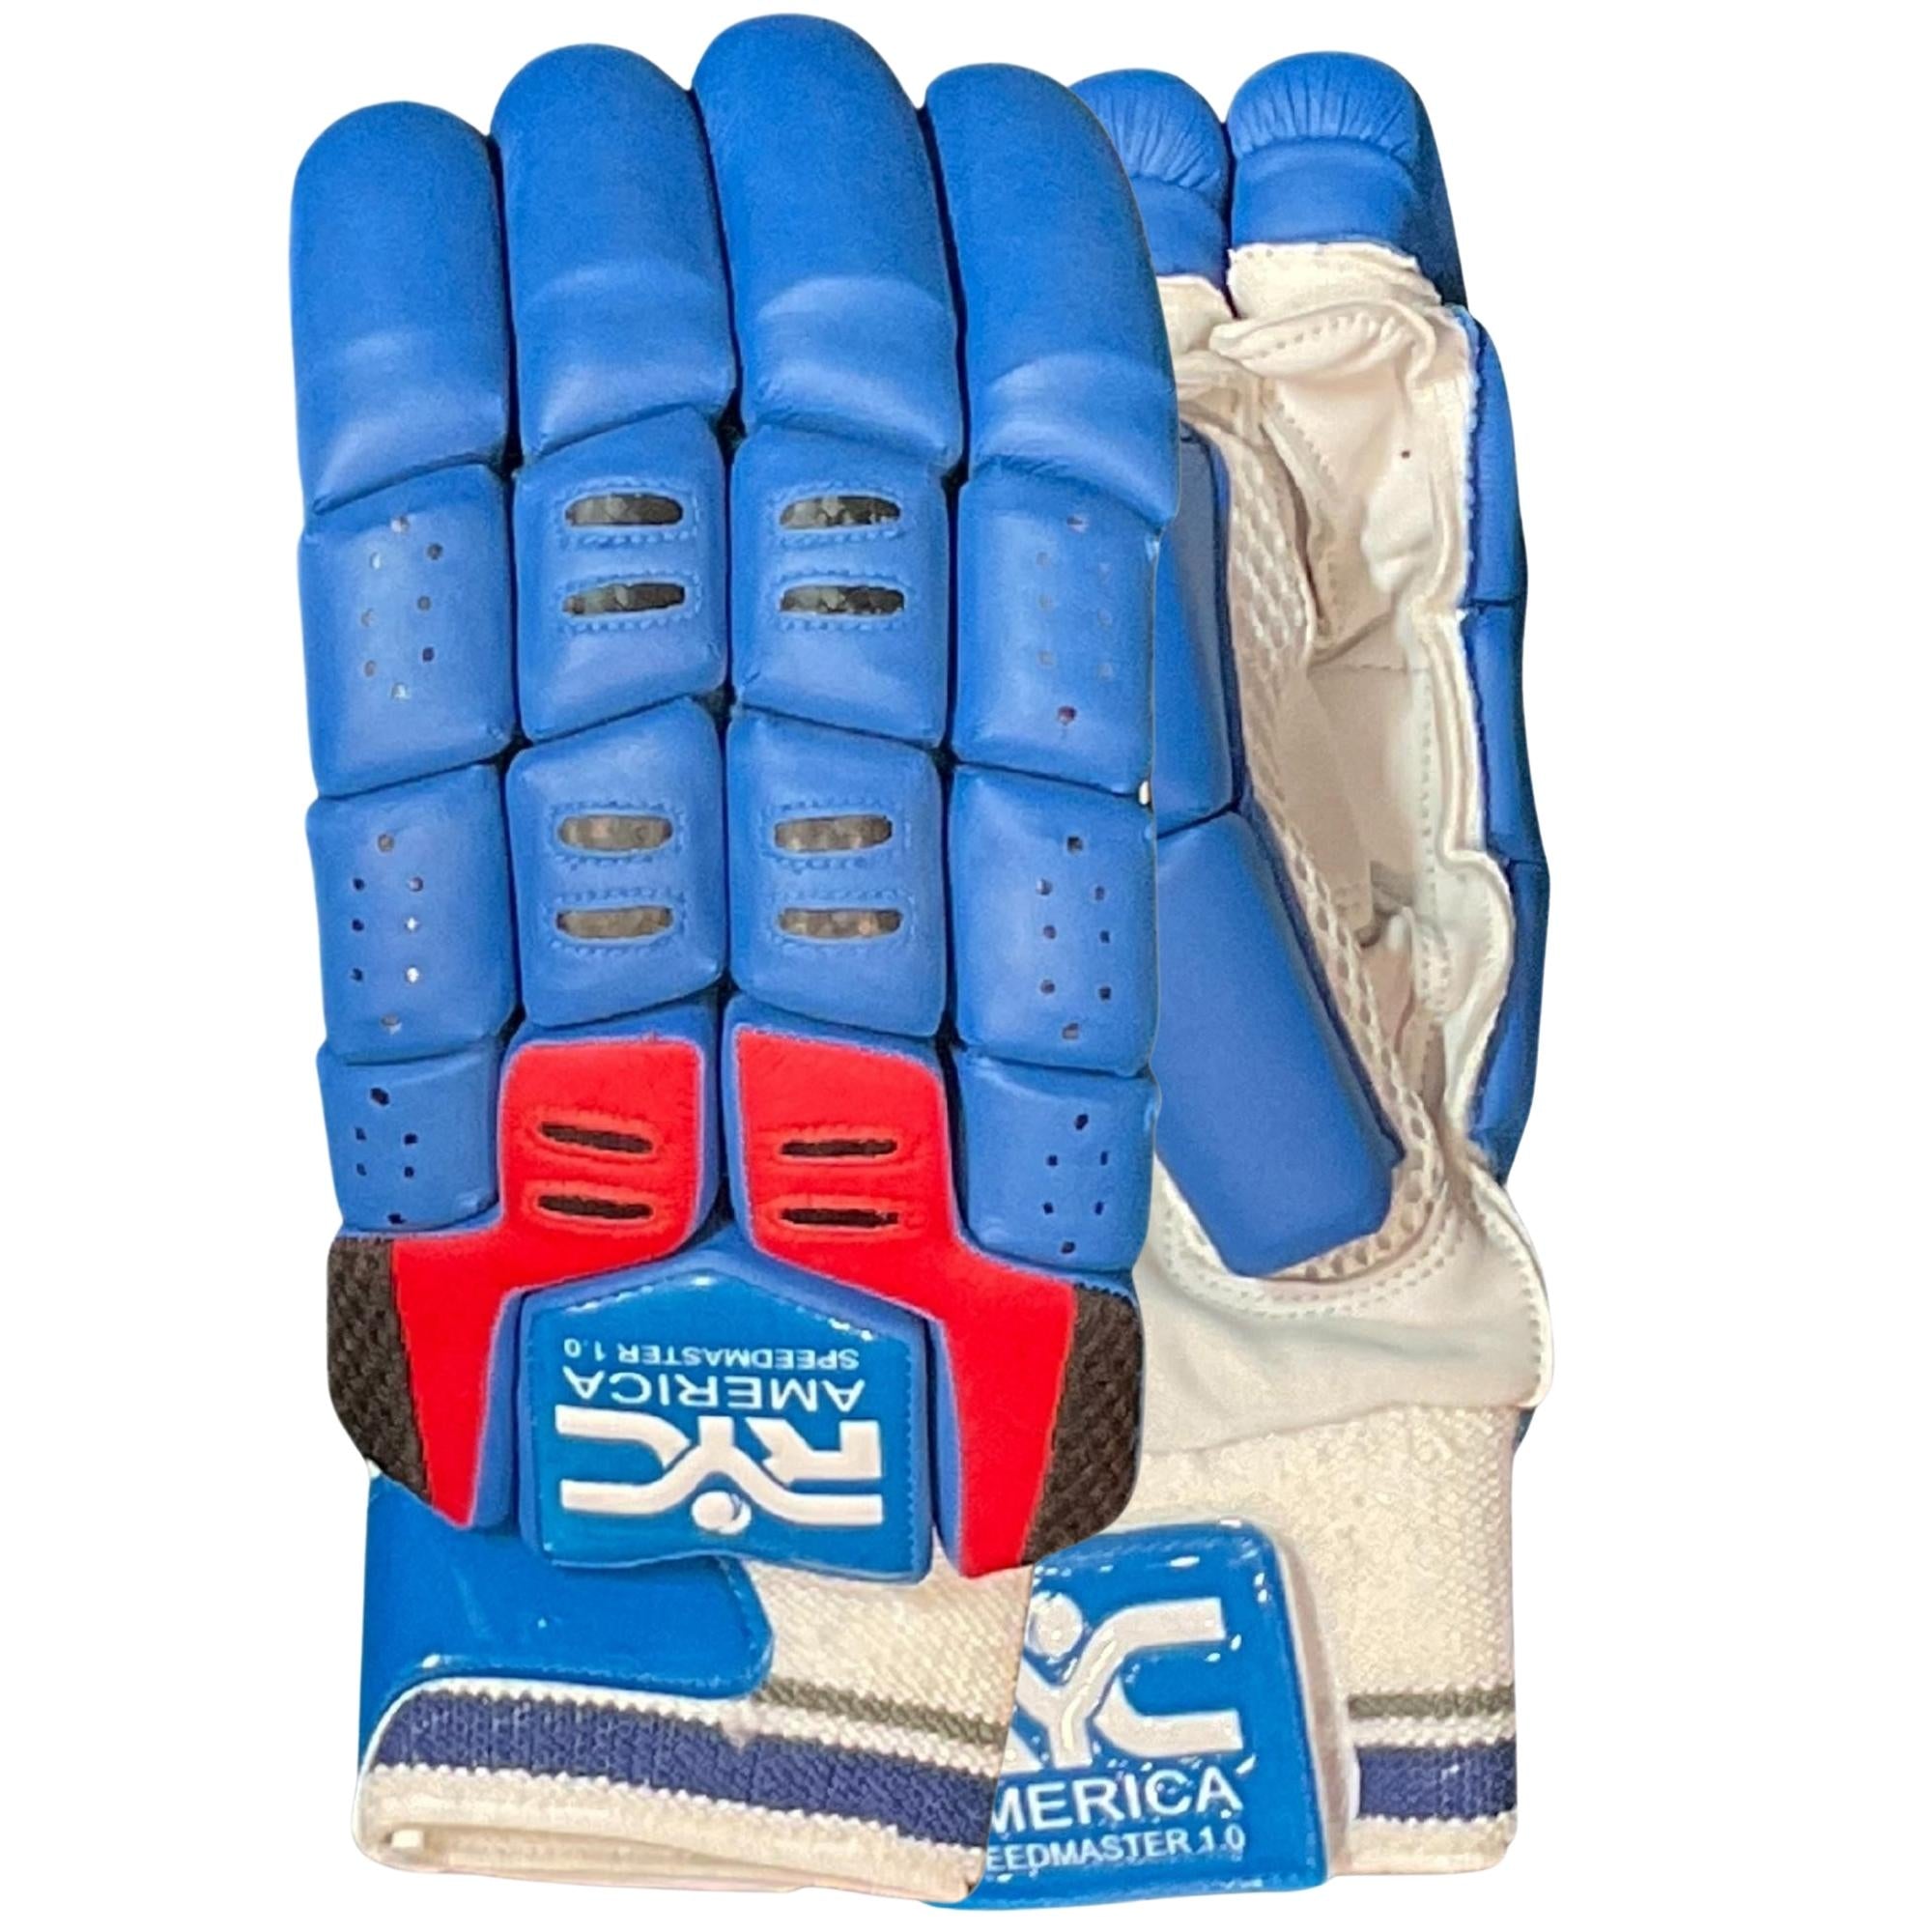 Zee Sports RYC Batting Gloves Limited Edition